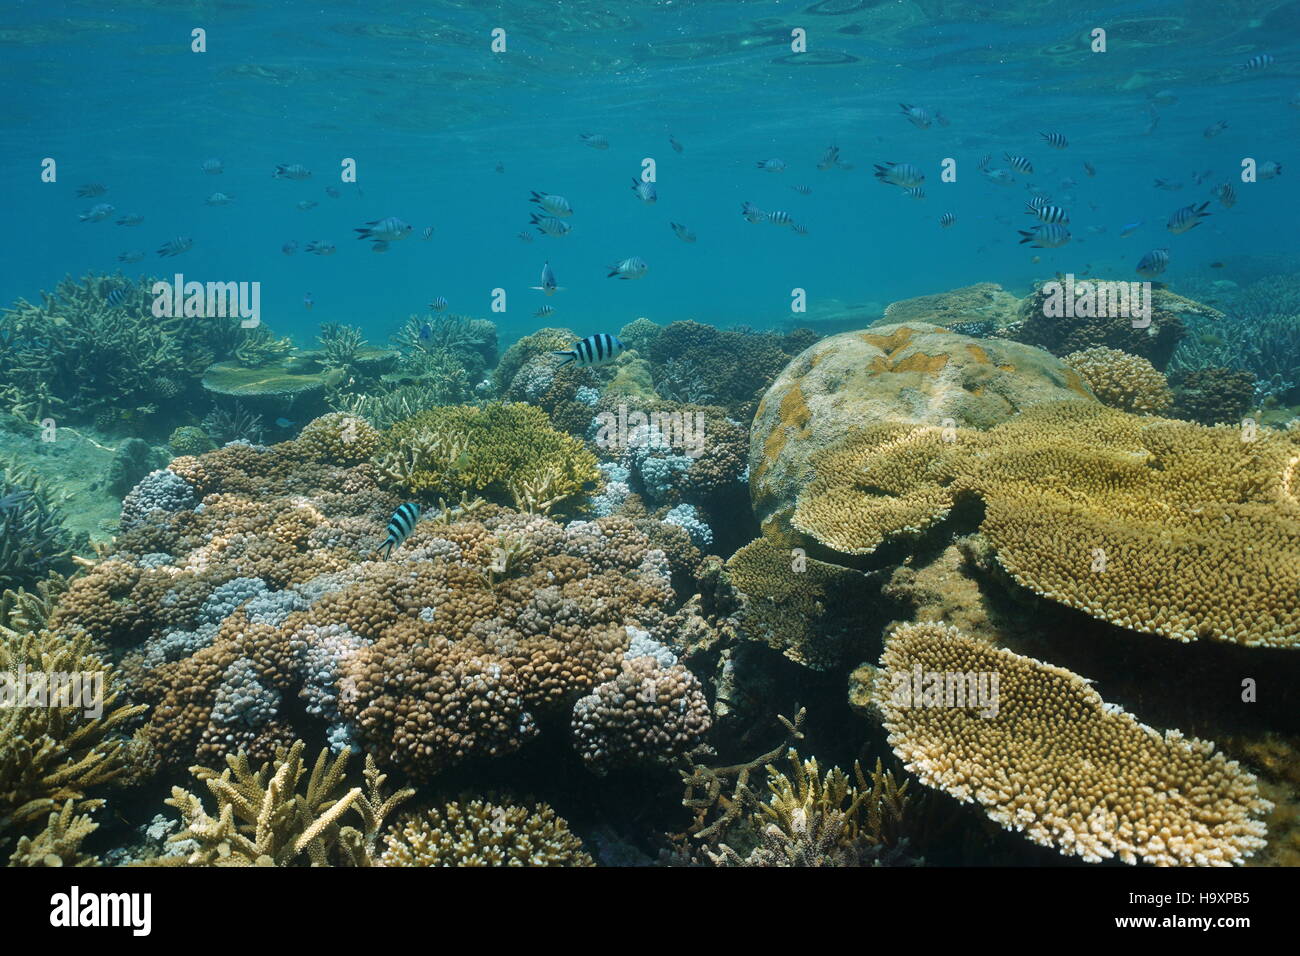 Soft and hard corals underwater on a shallow coral reef with fish damselfish, New Caledonia, south Pacific ocean Stock Photo